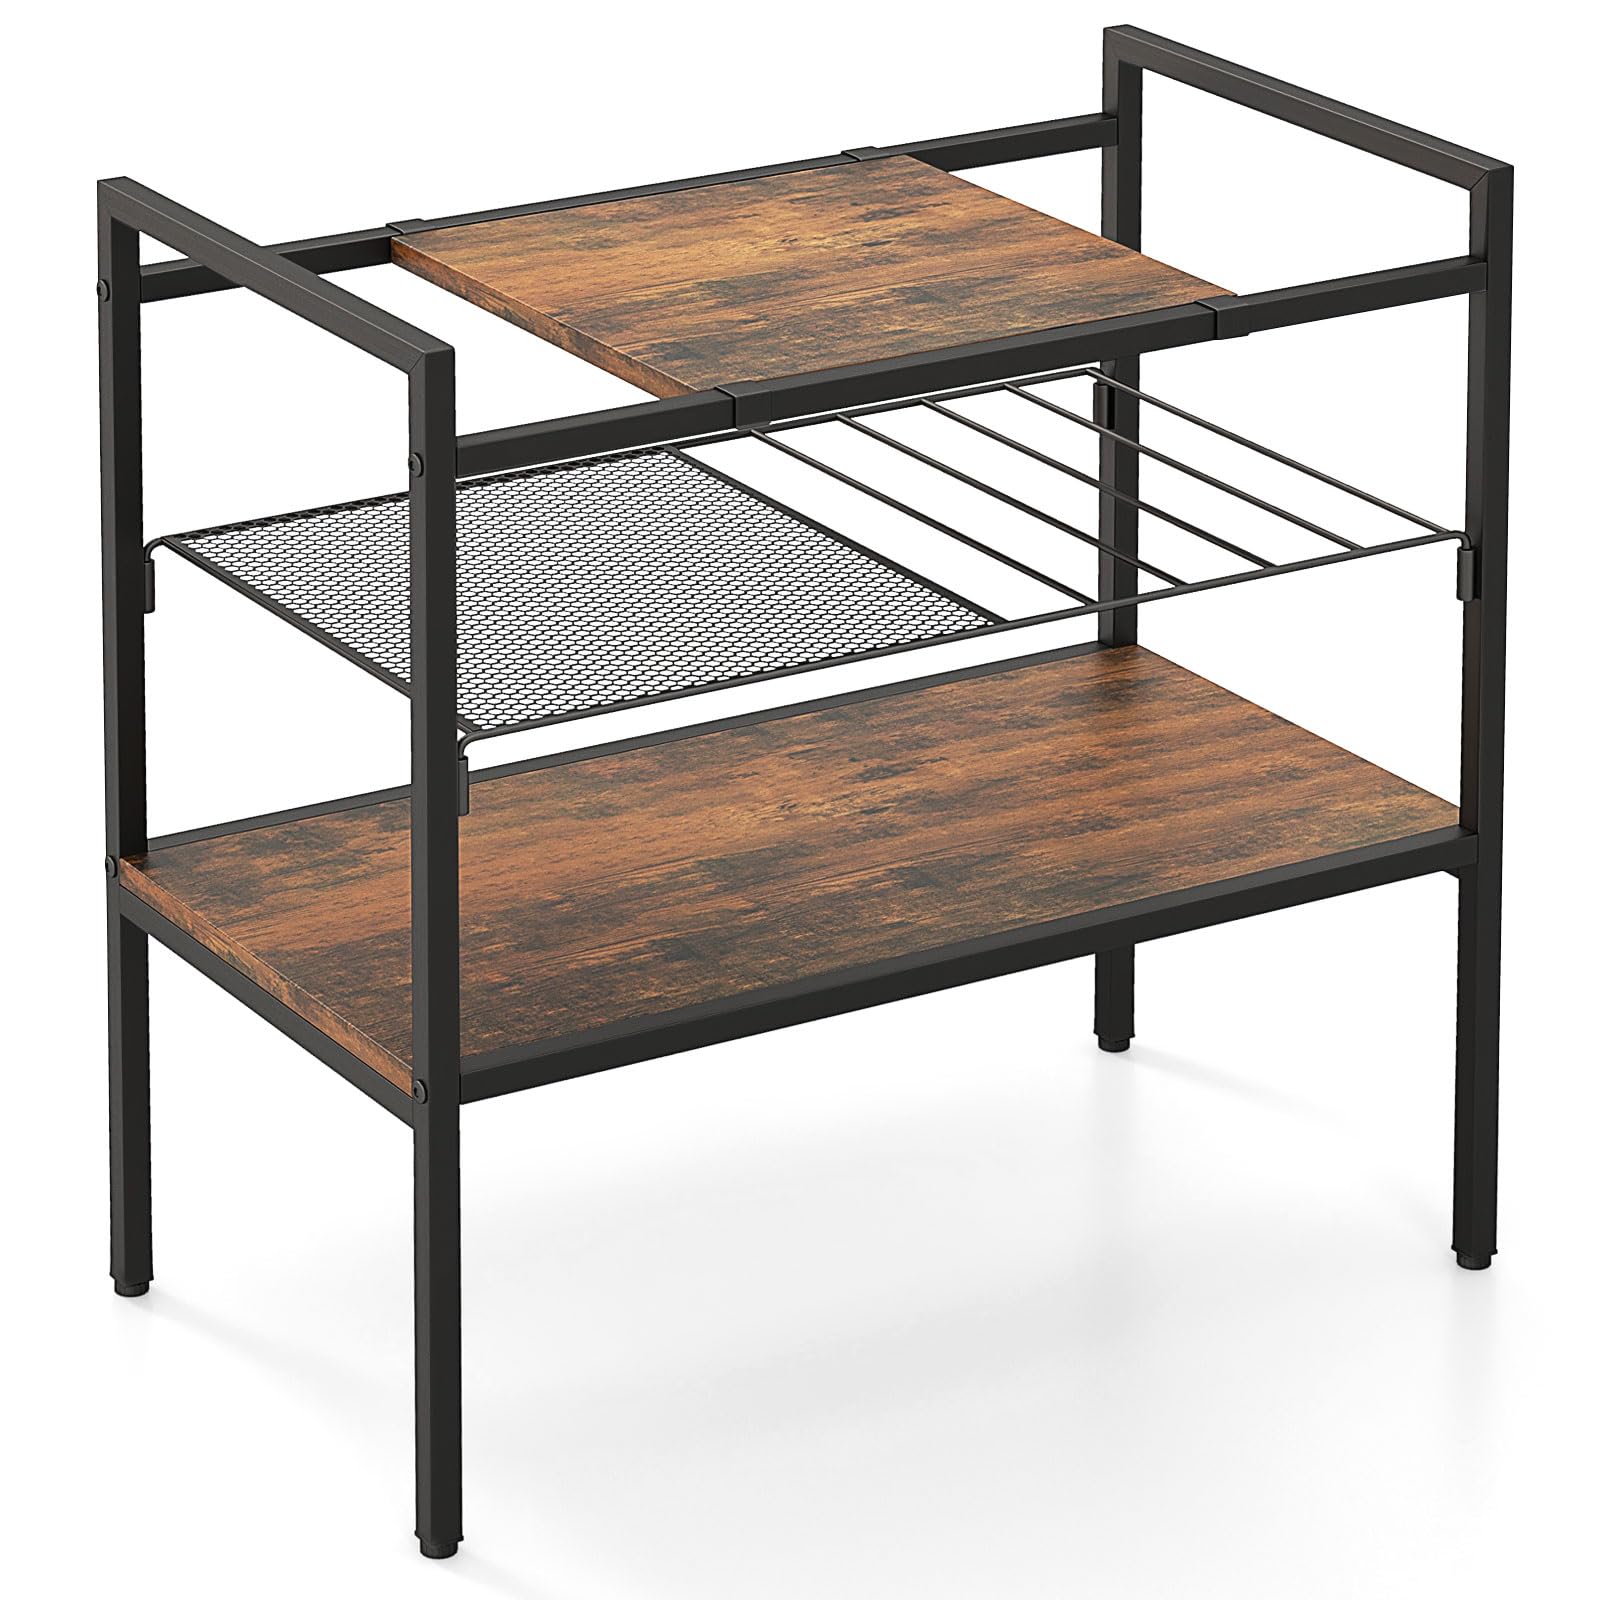 Giantex 3-Tier Storage Rack, 24" Compact Shelving Unit Storage Shelves with Unique Removable Panel for Different Heights